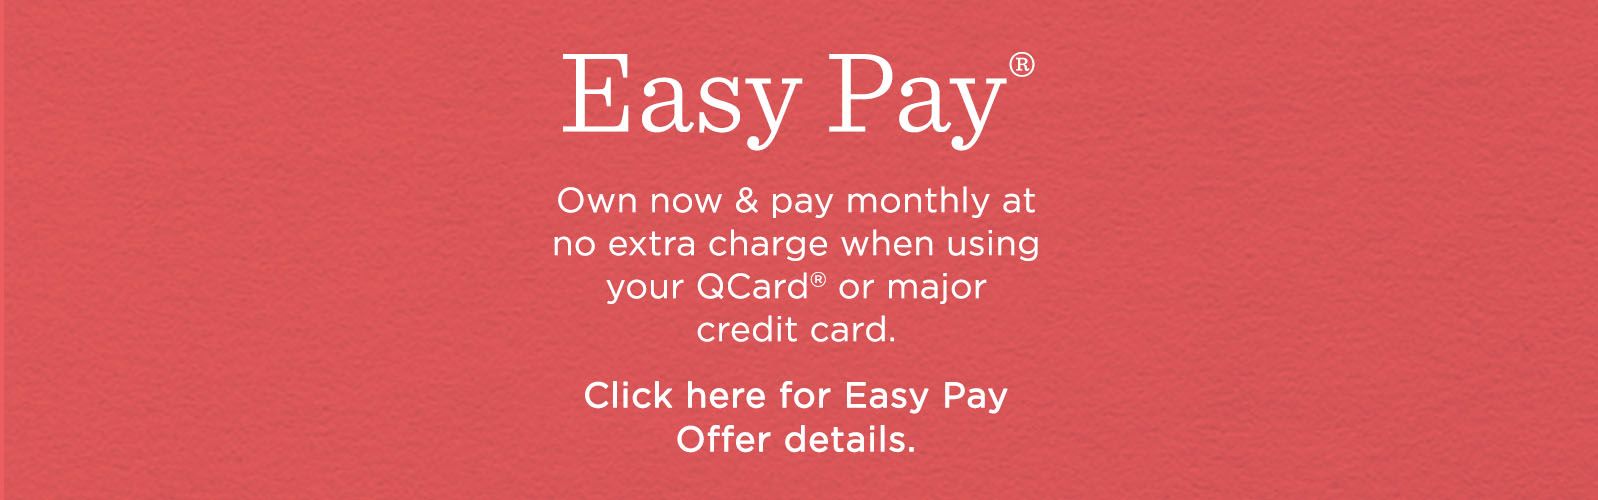 Easy Pay® Own now & pay monthly at no extra charge when using your QCard® or major credit card. Click here for Easy Pay Offer details.